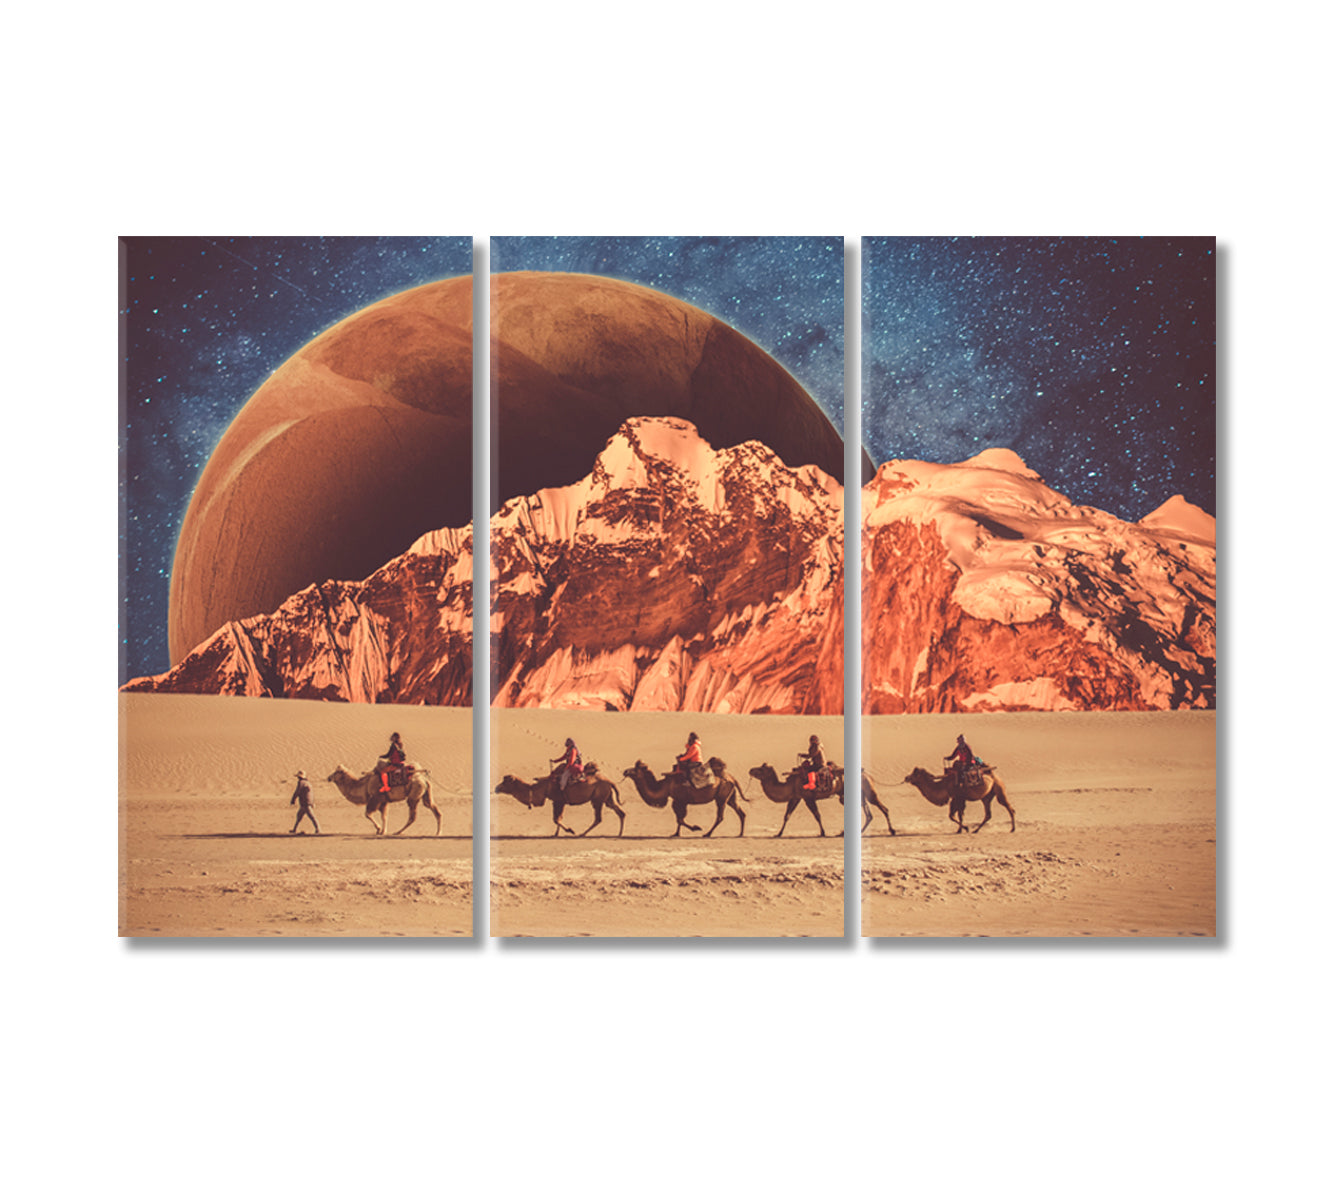 Fantasy Desert in Universe with Camels Canvas Print-Canvas Print-CetArt-3 Panels-36x24 inches-CetArt